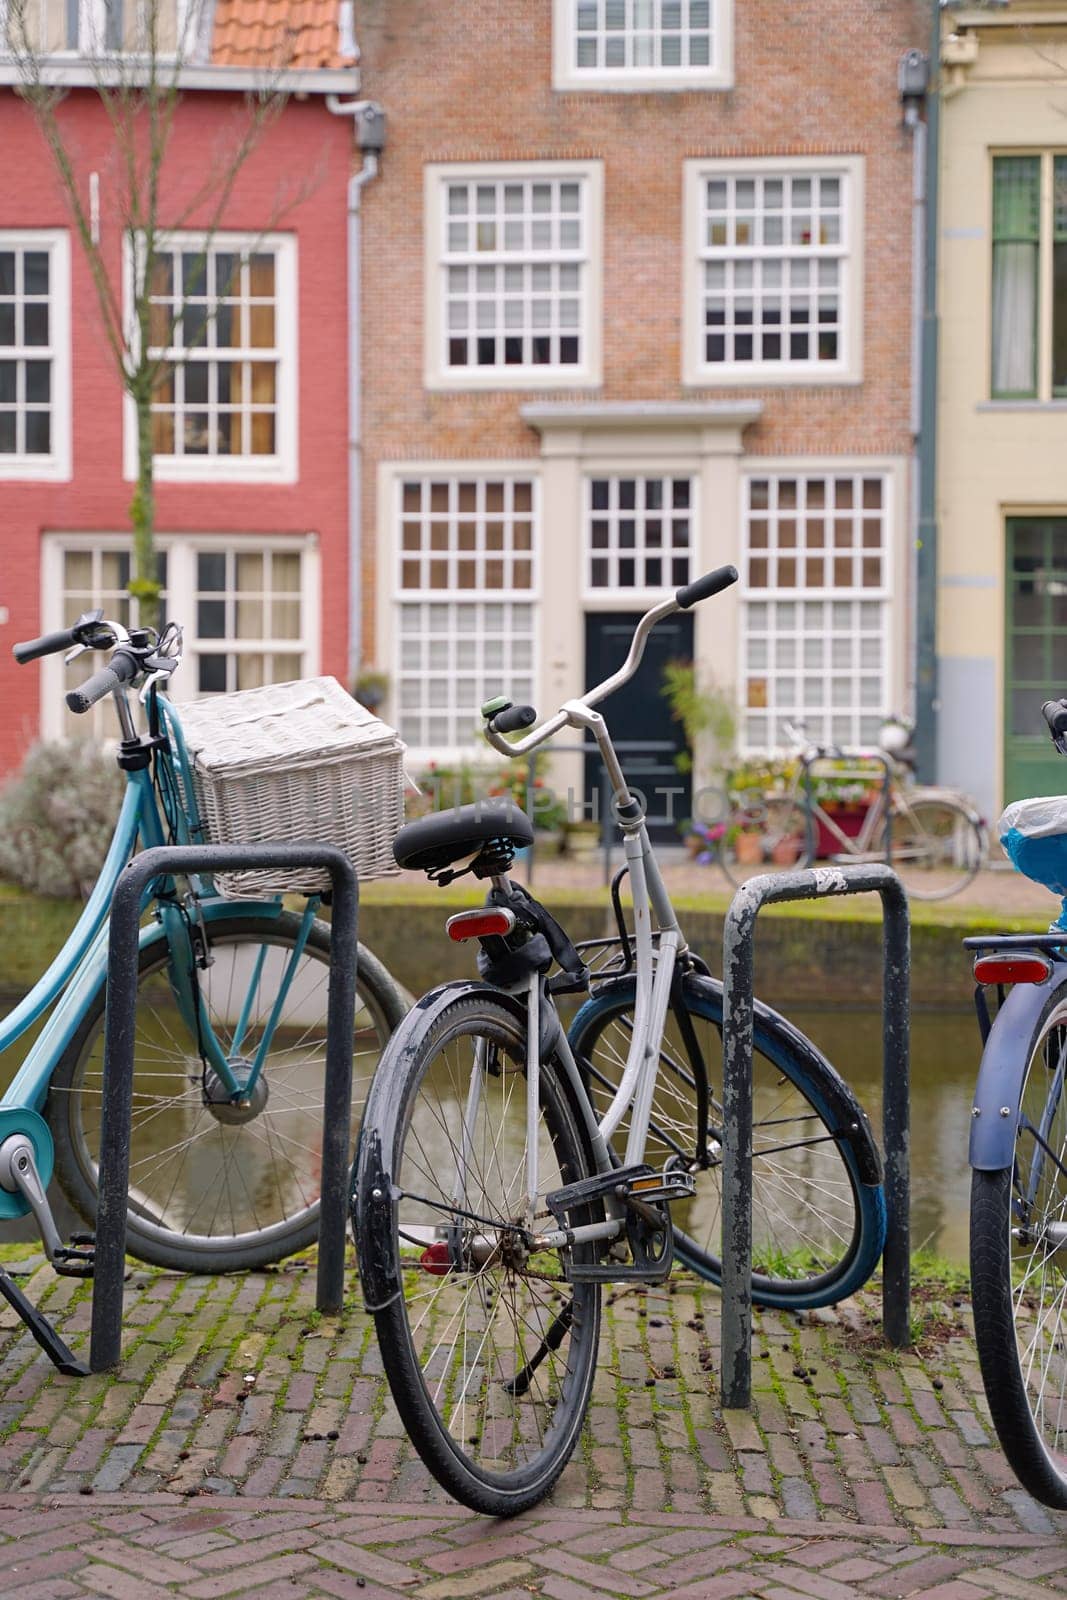 Picturesque Netherlands. Bicycles parked alongside a channel on beautiful old buildings background. by berezko